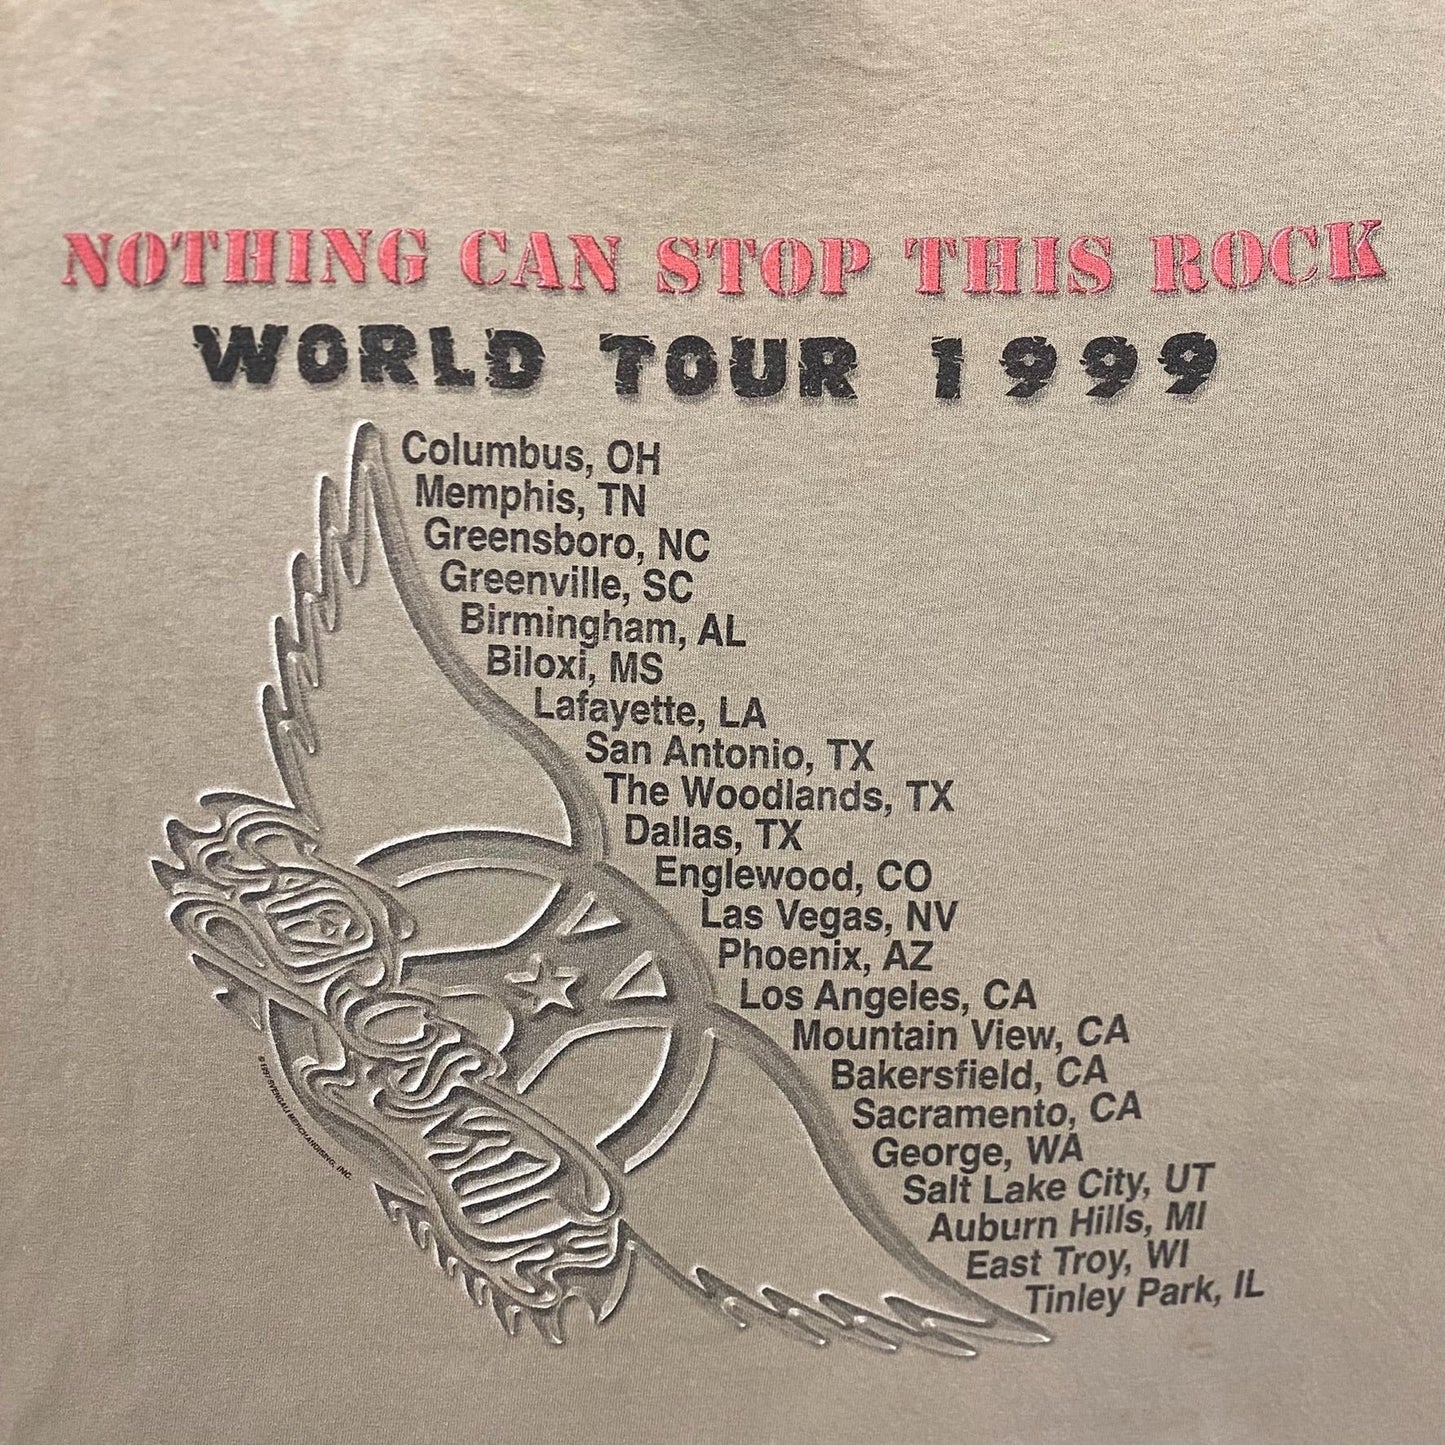 Vintage 90s Essential Aerosmith Tour Wings Rock Band T-Shirt